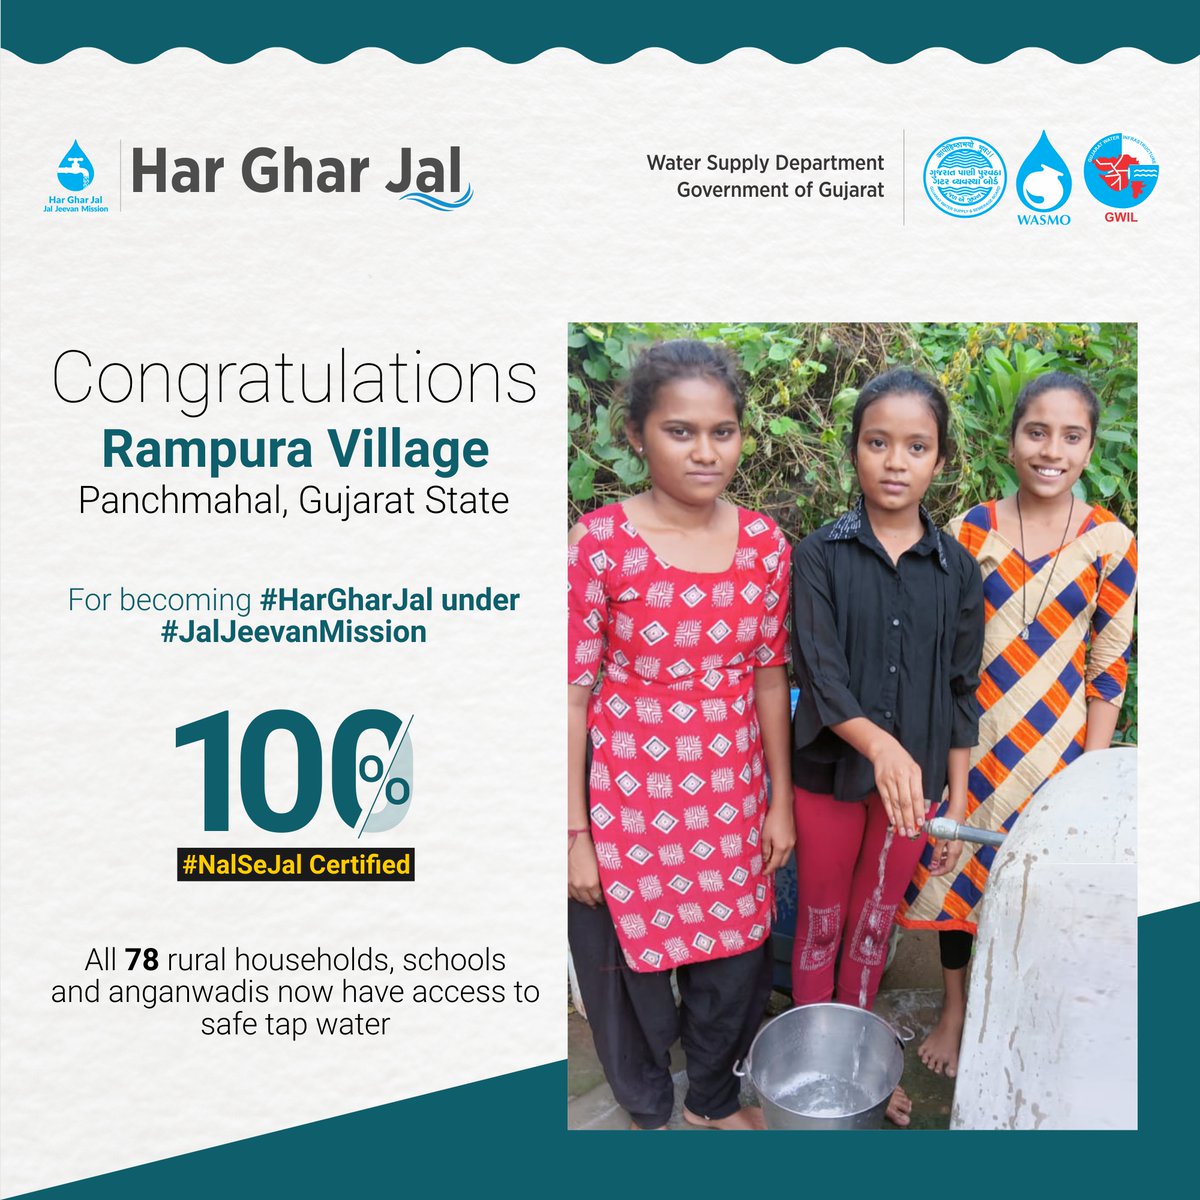 Congratulations to all the people of Rampura Village of #Panchmahal, #Gujarat State, for becoming 100% #HarGharNalSeJal certified. All 78 rural households, schools and anganwadis are now getting safe tap water under #JalJeevanMission